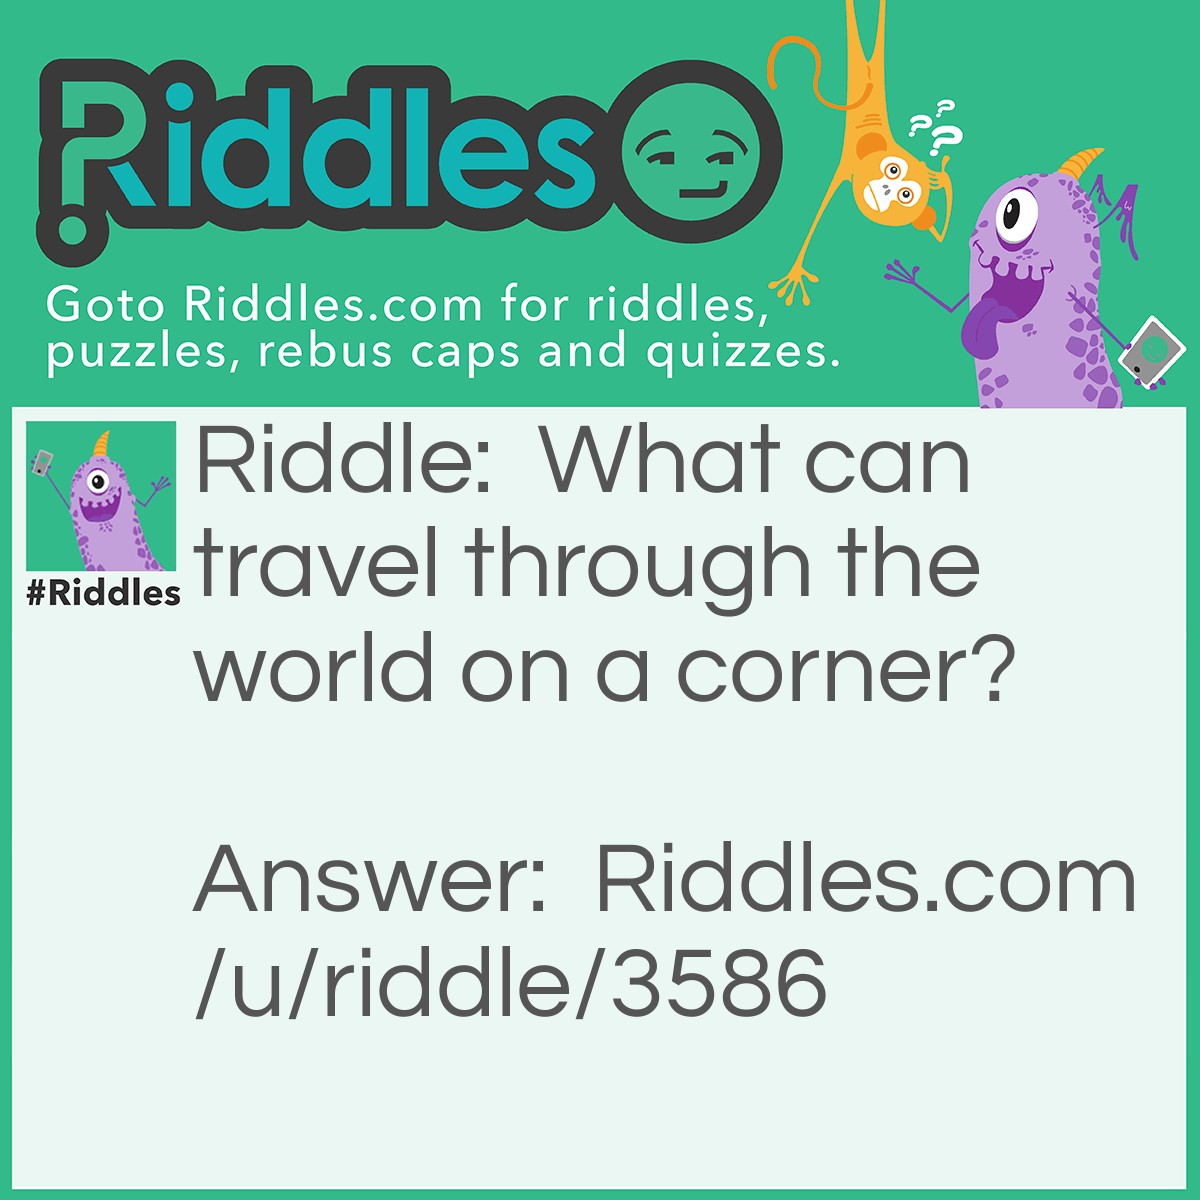 Riddle: What can travel through the world on a corner? Answer: A stamp.